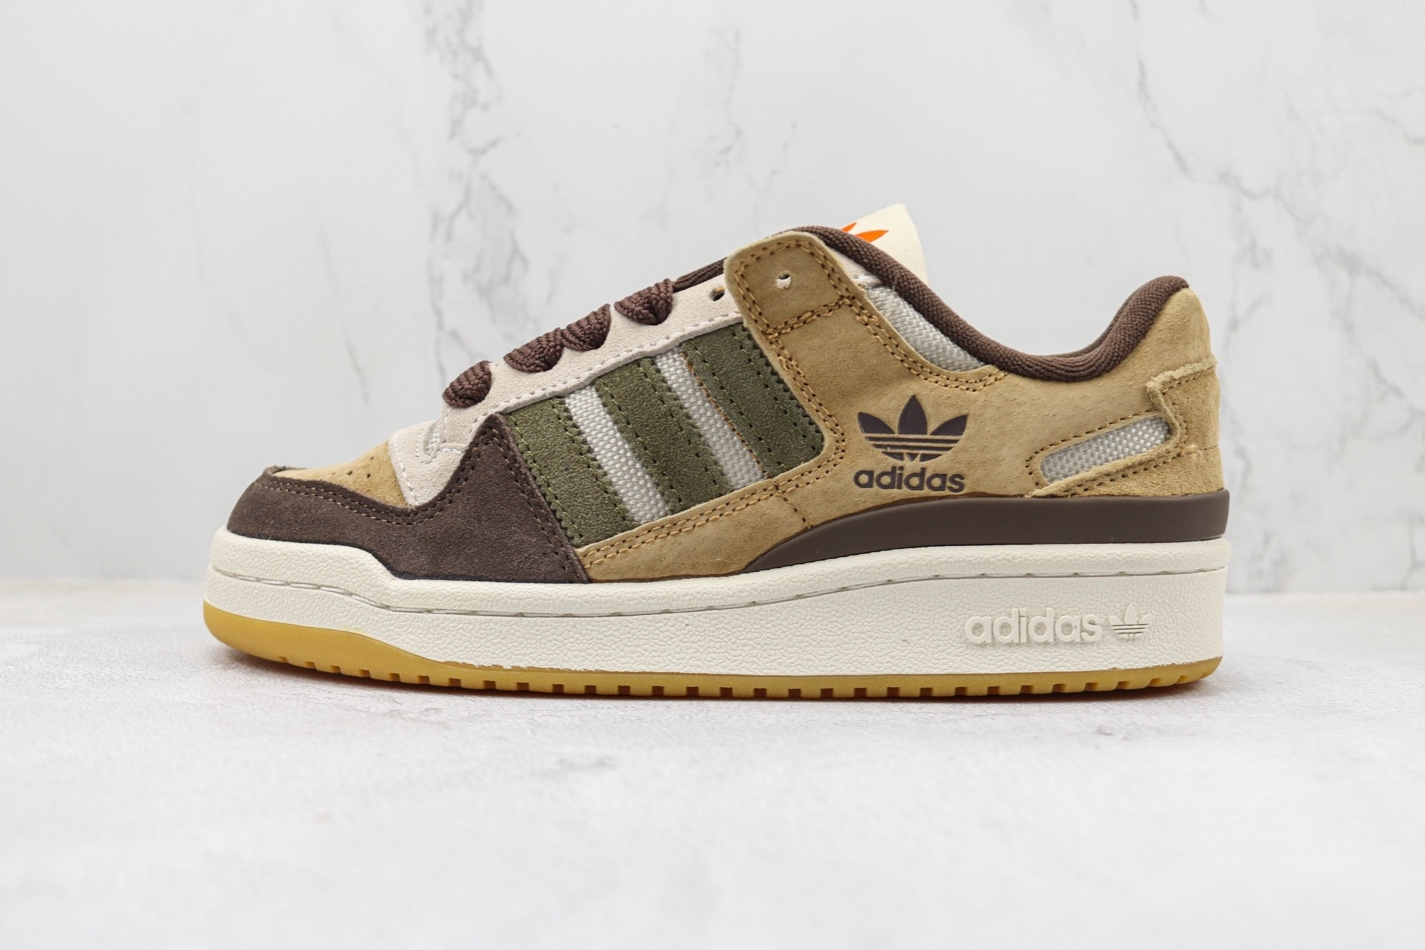 Adidas Forum Low 84 'Branch Brown' GW4334 - Shop Now at Our Online Store!